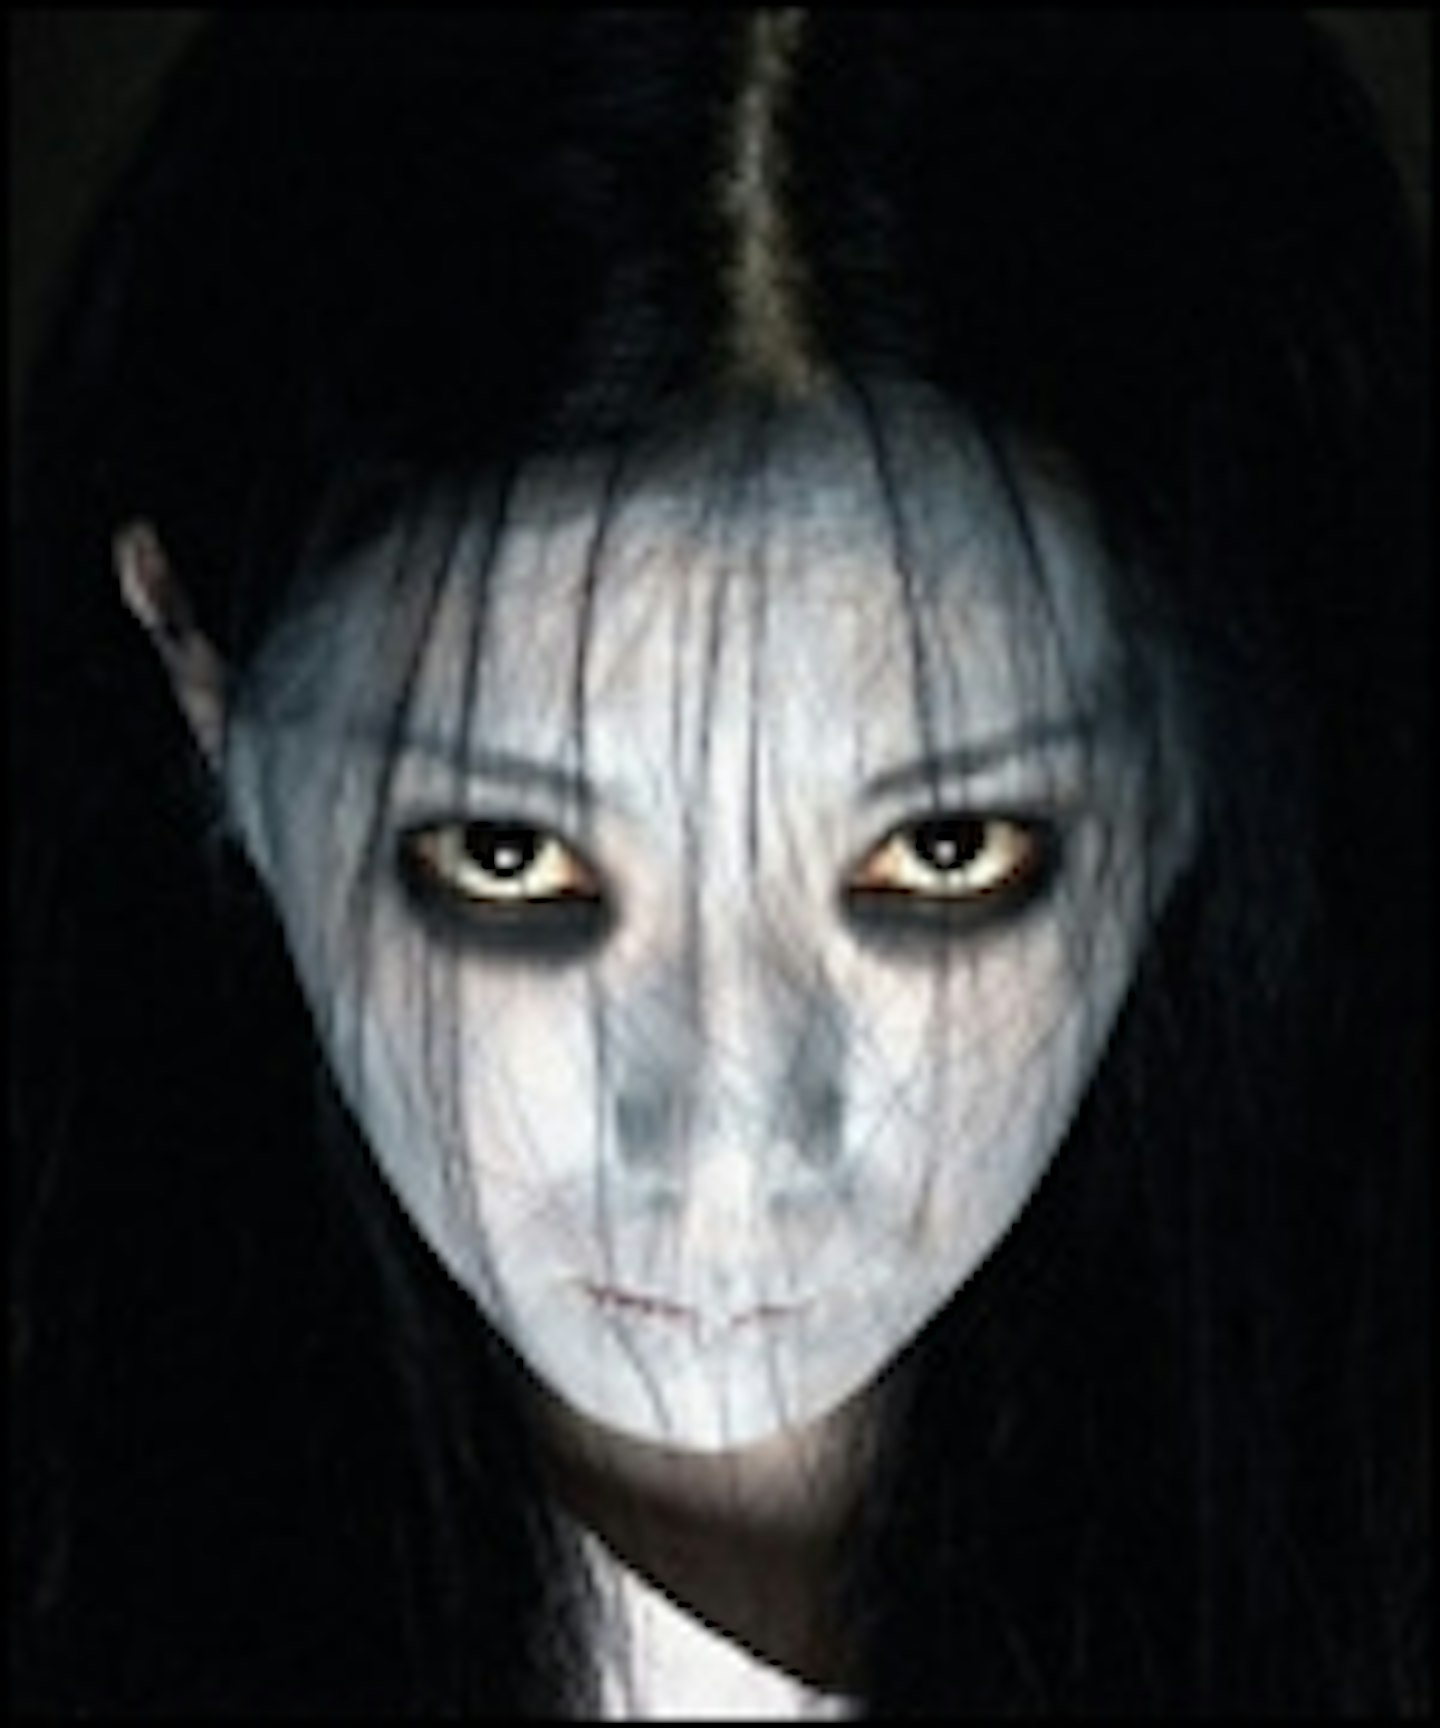 Japanese Trailer For The Grudge 10 Online